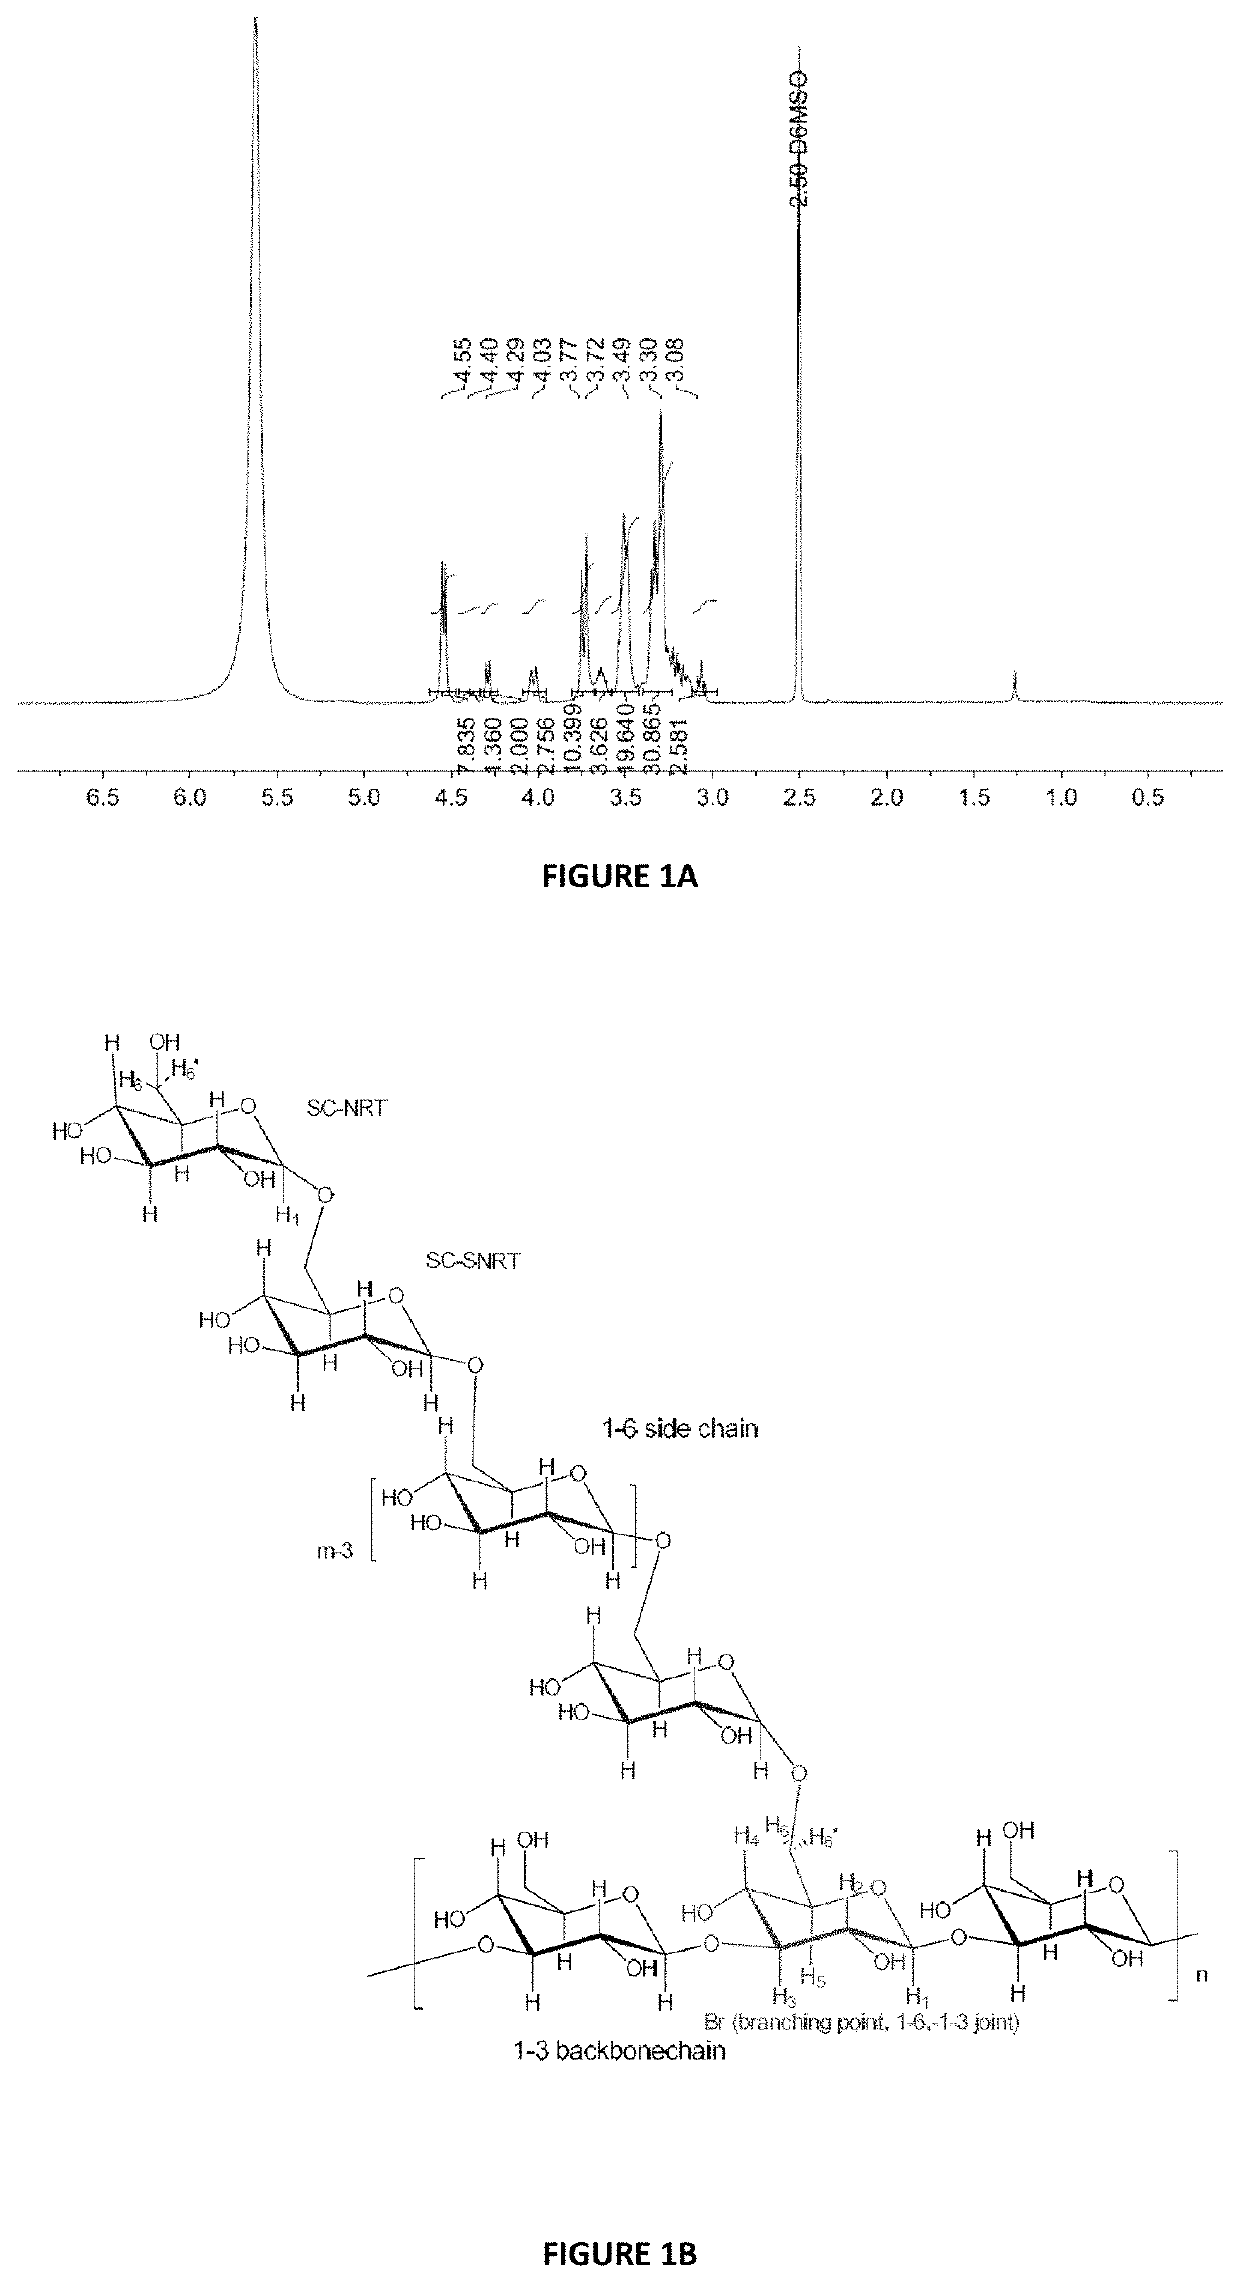 Method of making a beta glucan compound